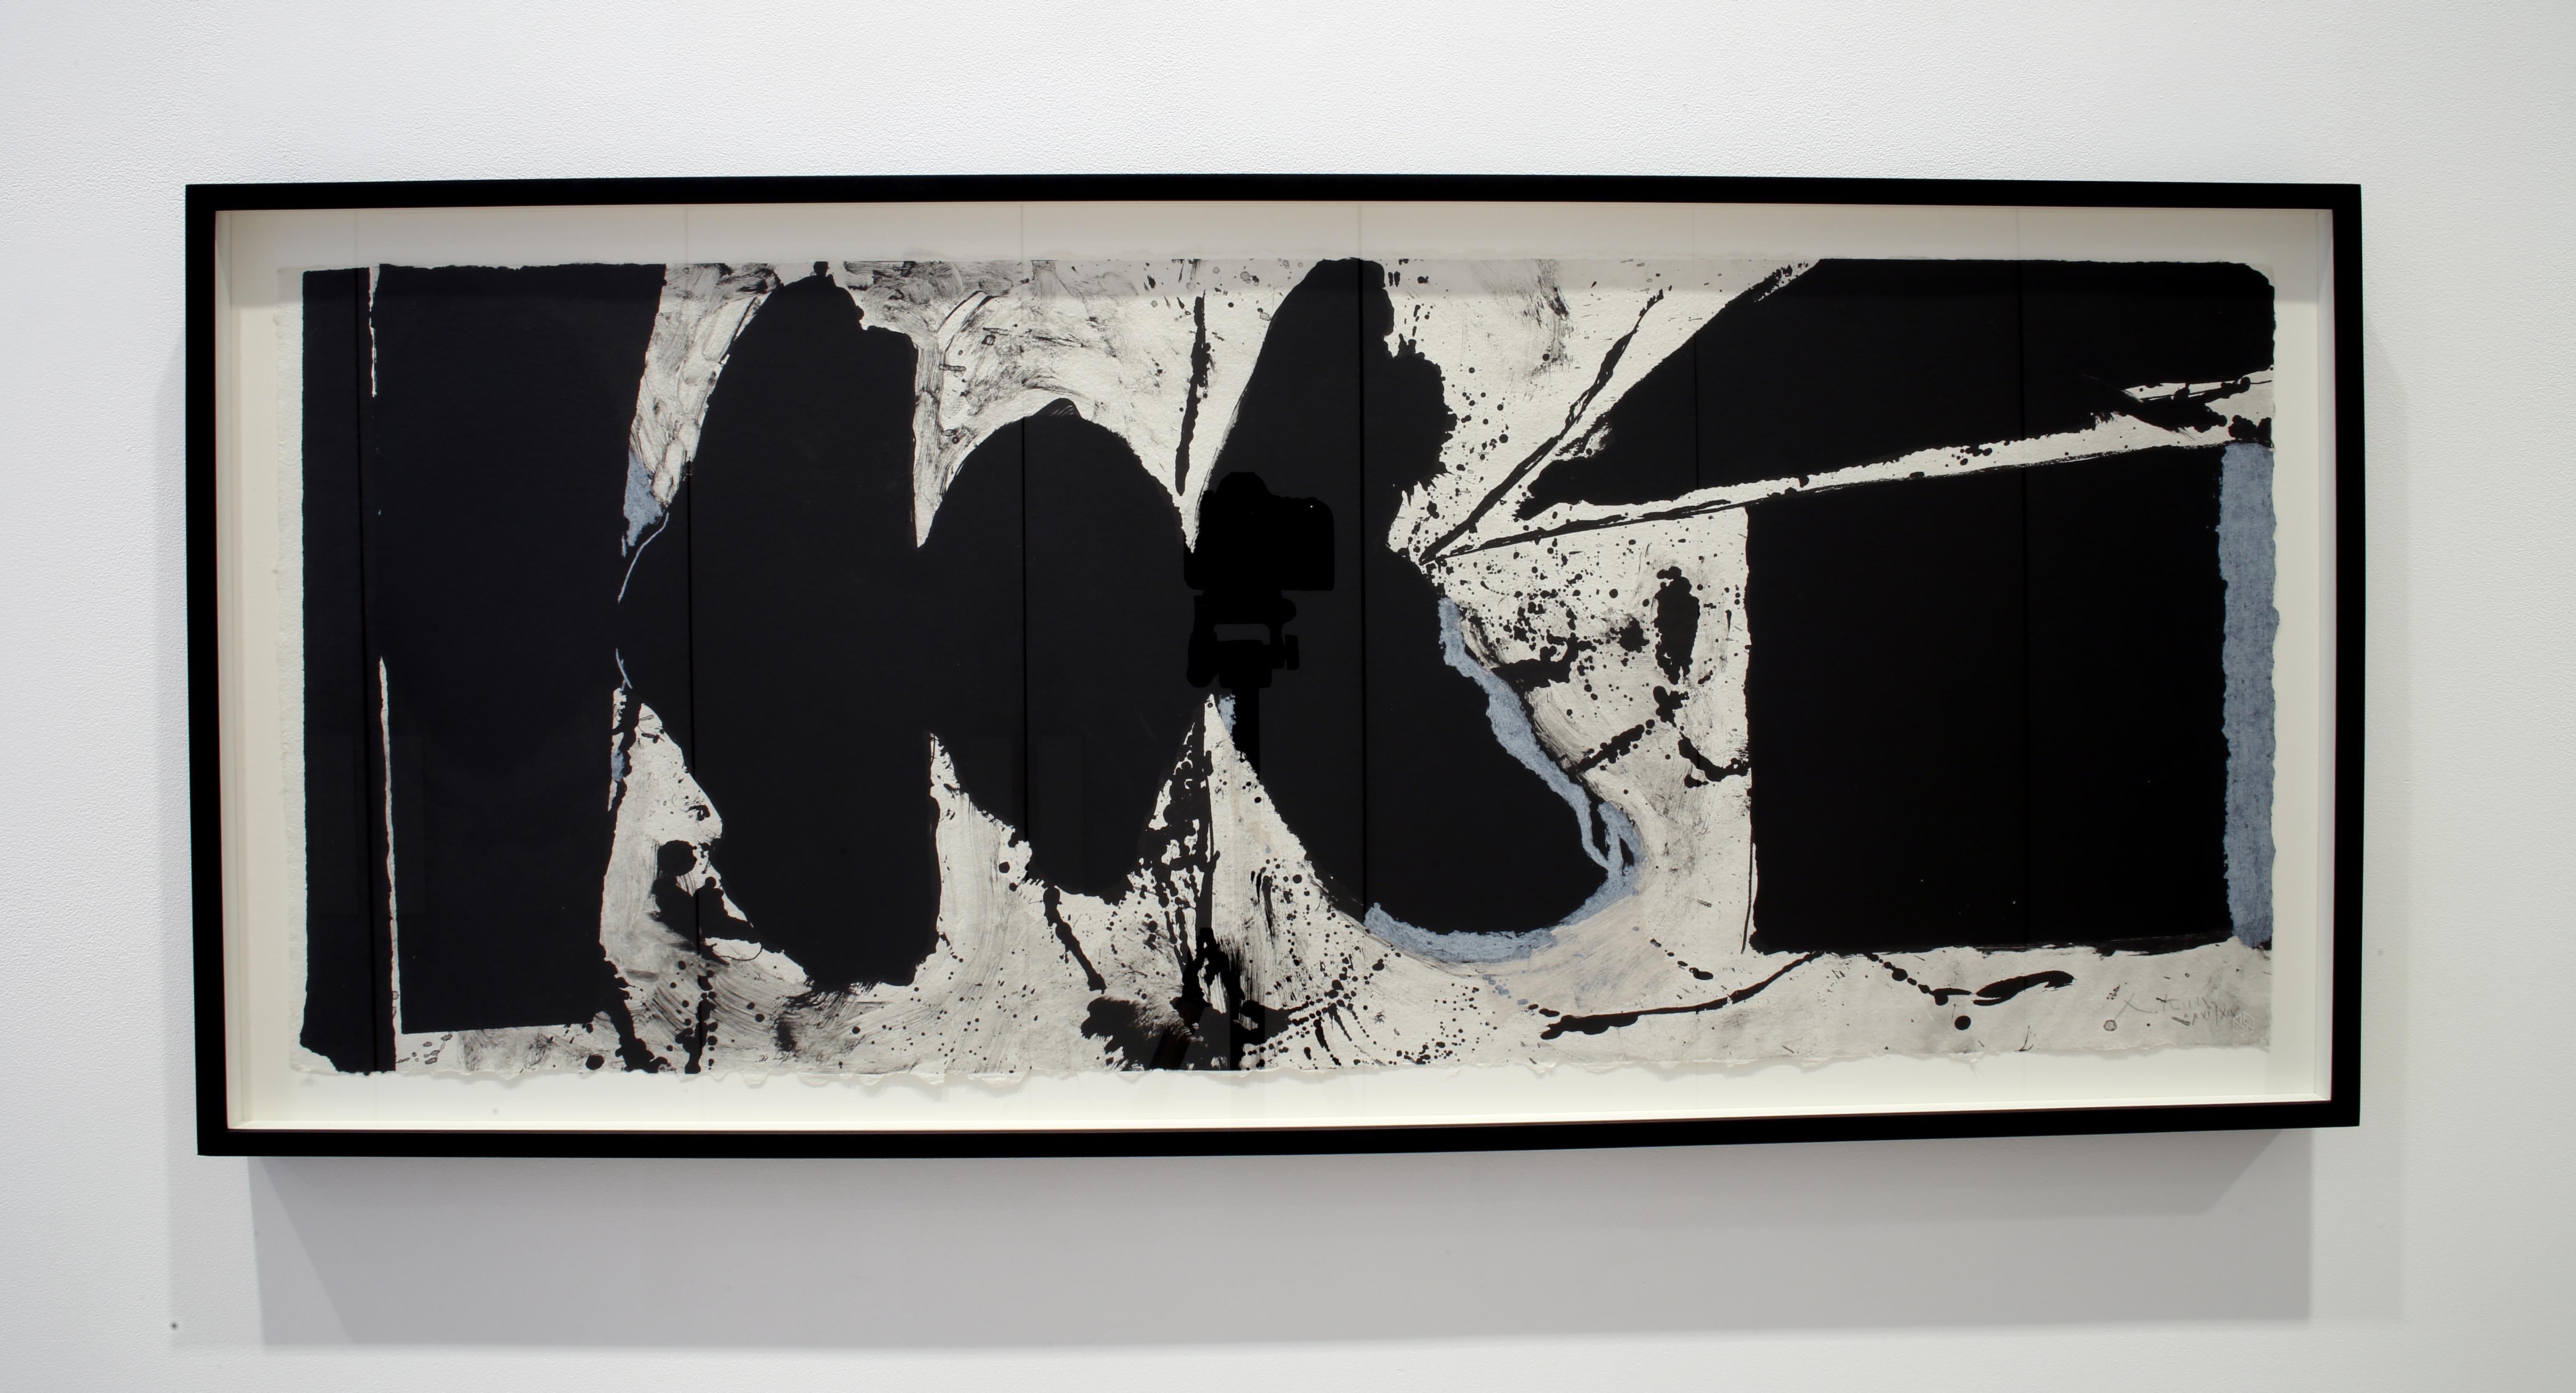 Elegy Black Black, a beautiful lithography from Motherwell's elegy series - Print by Robert Motherwell